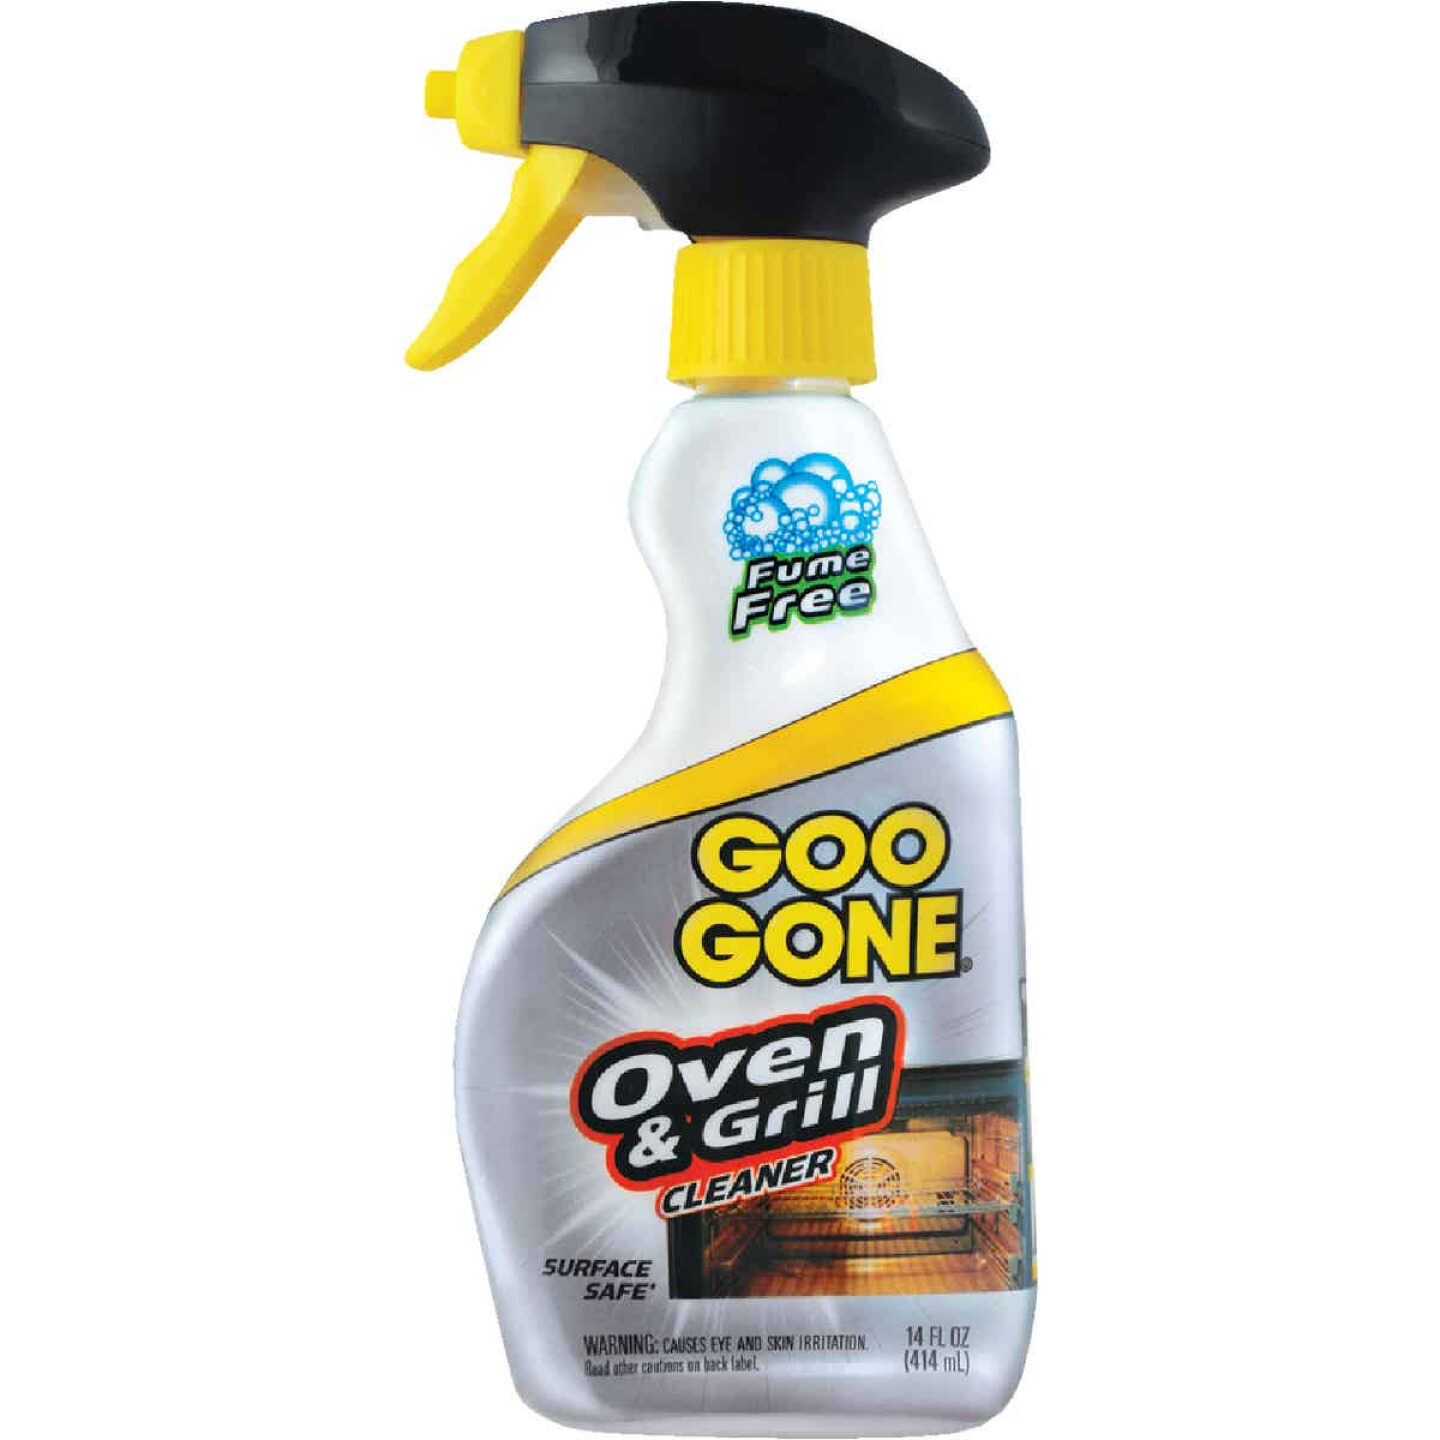 Goo Gone 14 Oz. Fume Free Oven & Grill Cleaner Image 1